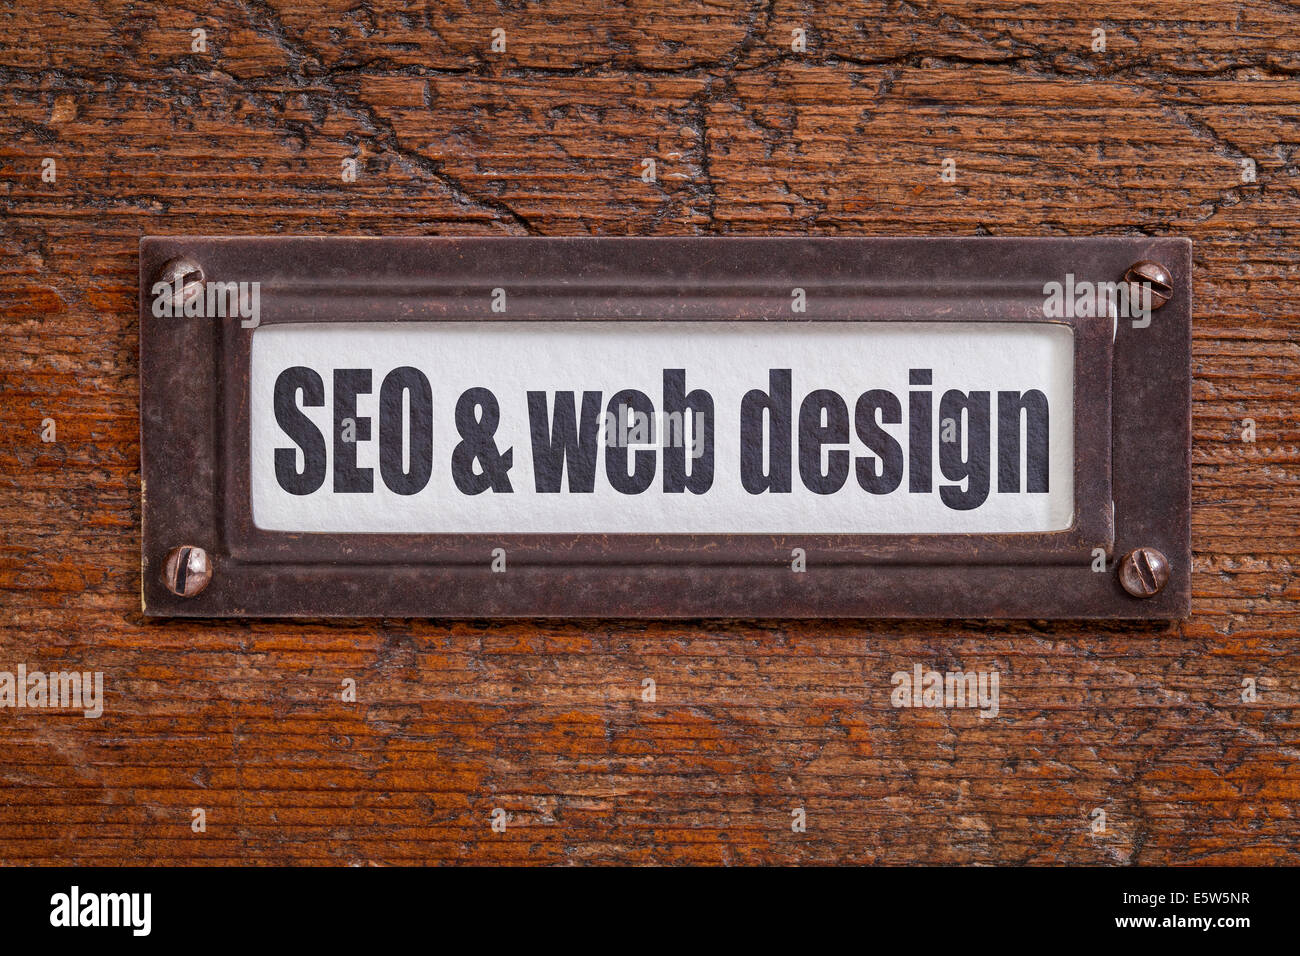 SEO and web design  - file cabinet label, bronze holder against grunge and scratched wood Stock Photo